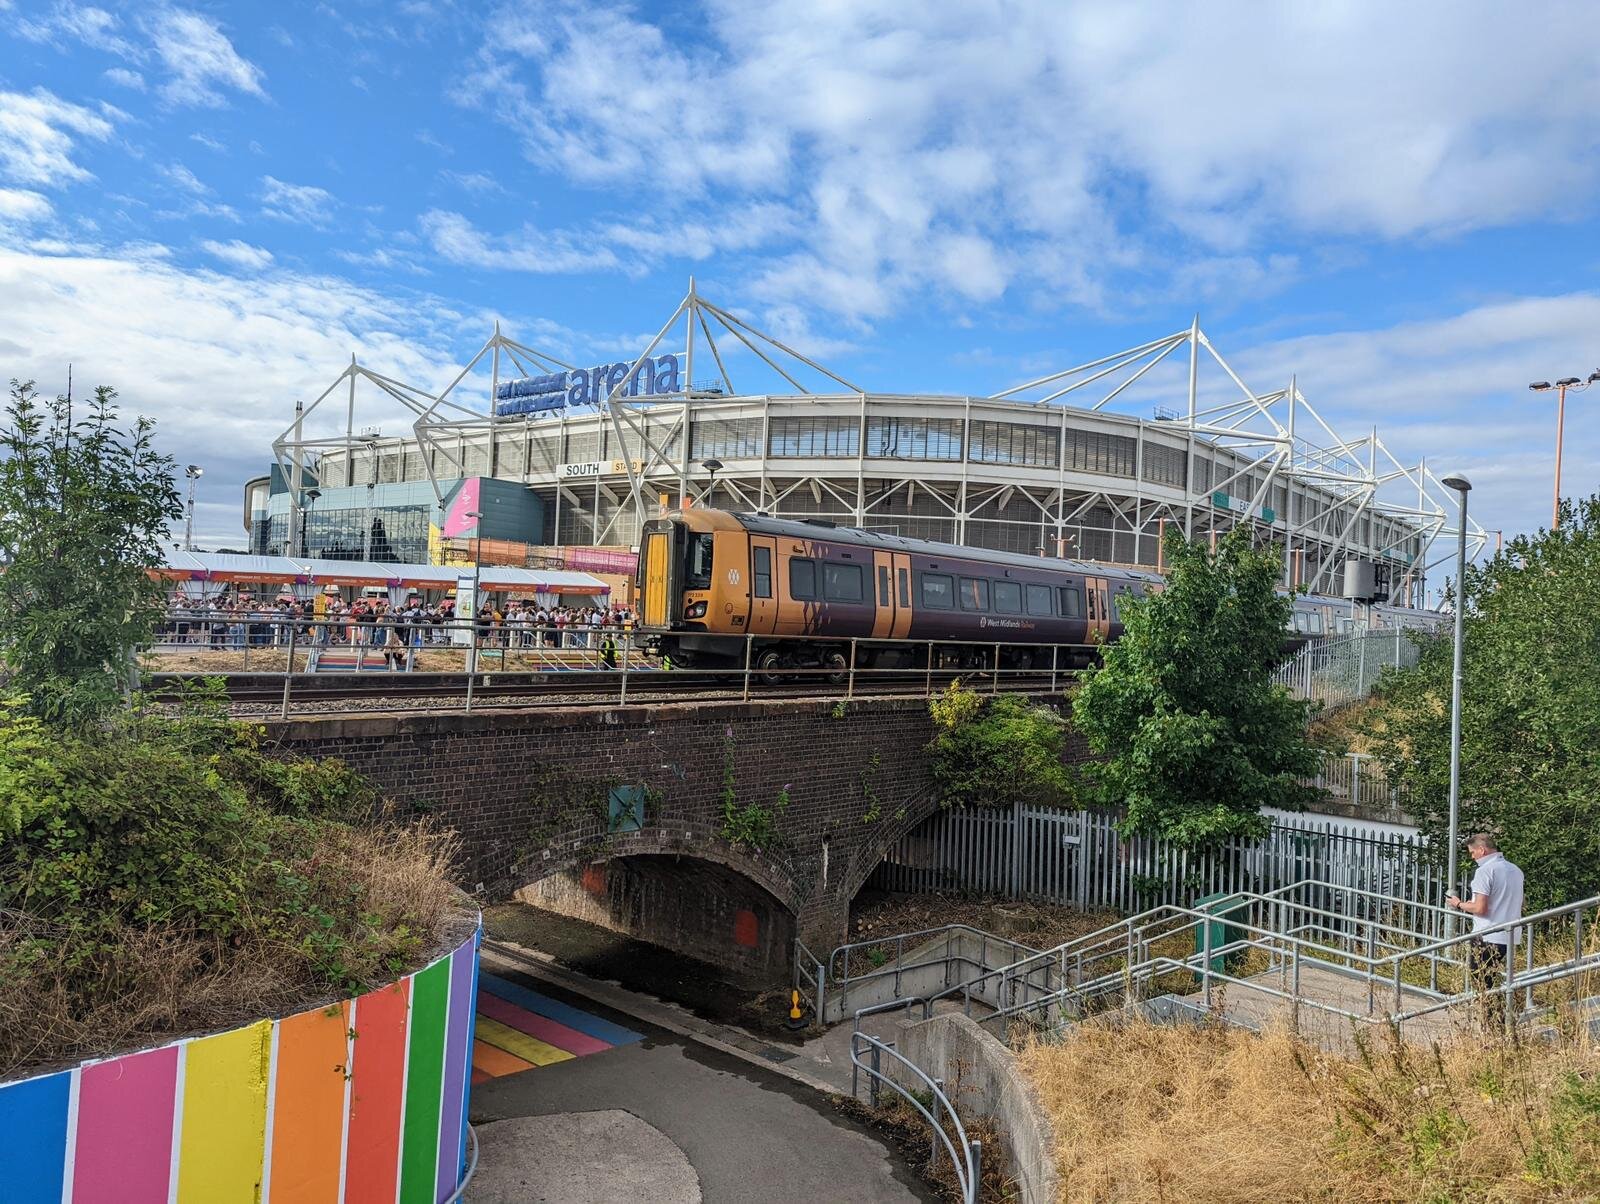 West Midlands trains on the railway outside of the Coventry Arena with Commonwealth Games 2022 branding.